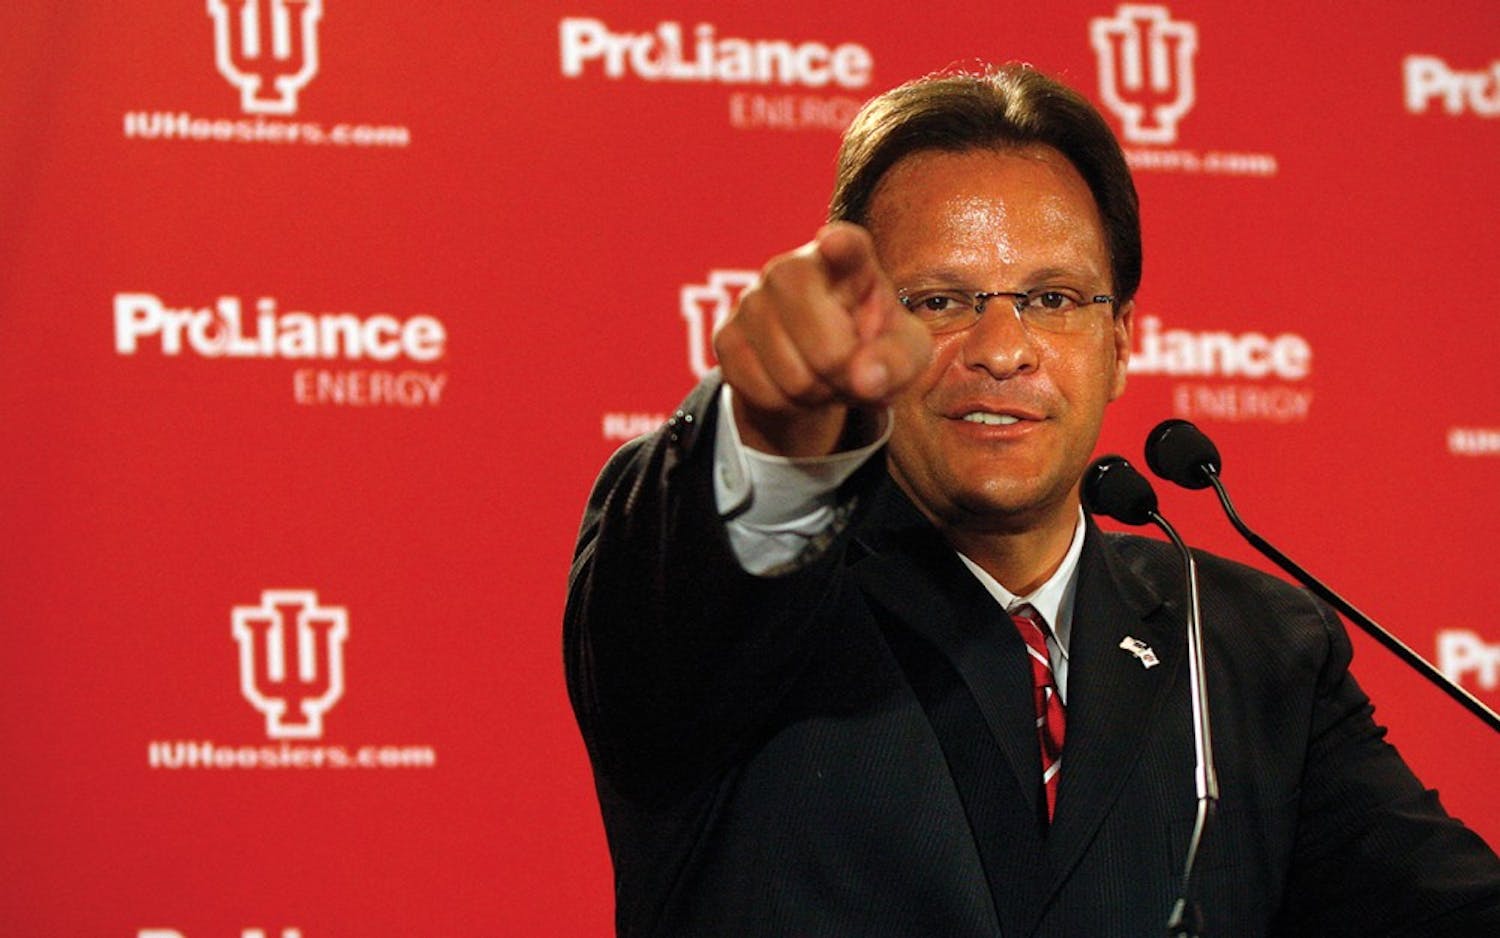 Jacob Kriese•IDS
IU's new head men's basketball coach Tom Crean answers media questions at a press conference on Wednesday, April 2, 2008 in the Hoosier Room.  